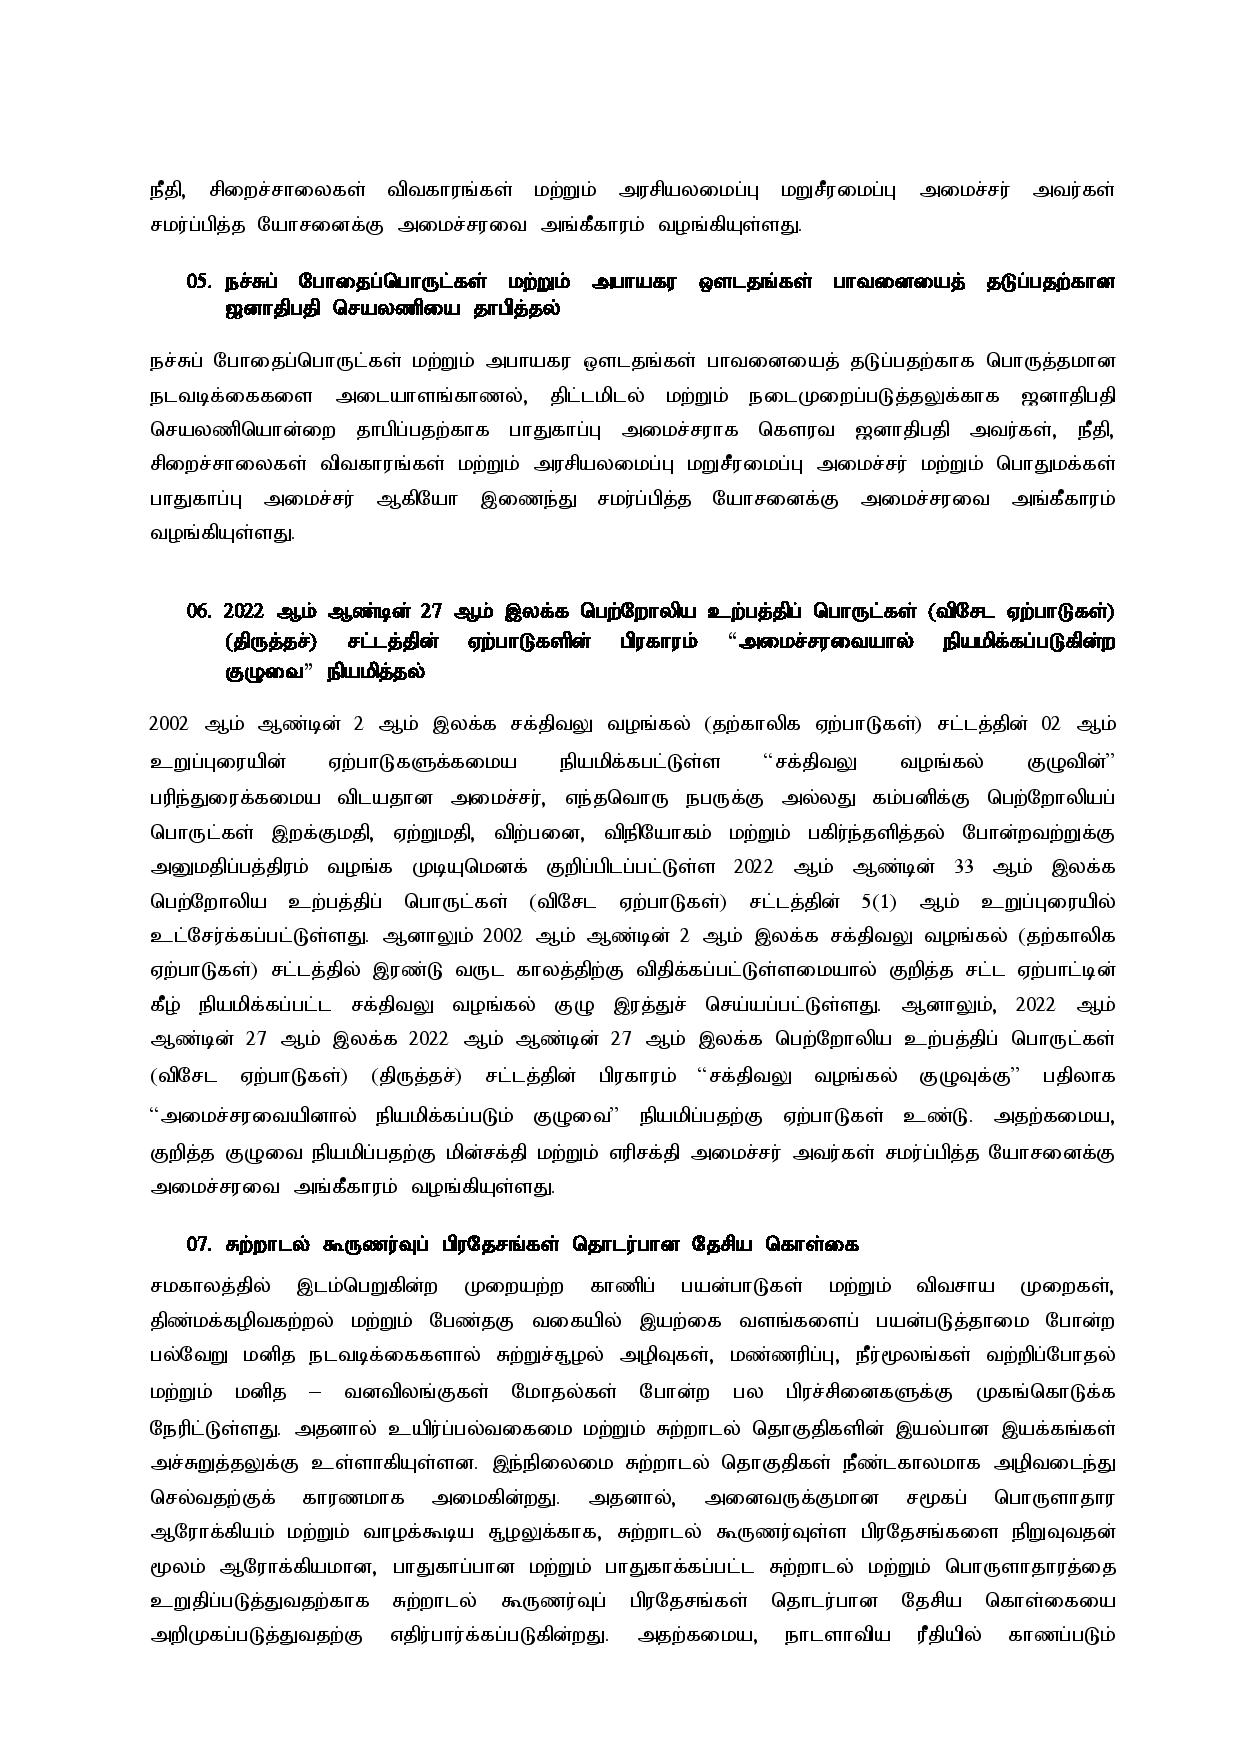 Cabinet Decisions on 21.11.2022 Tamil page 002